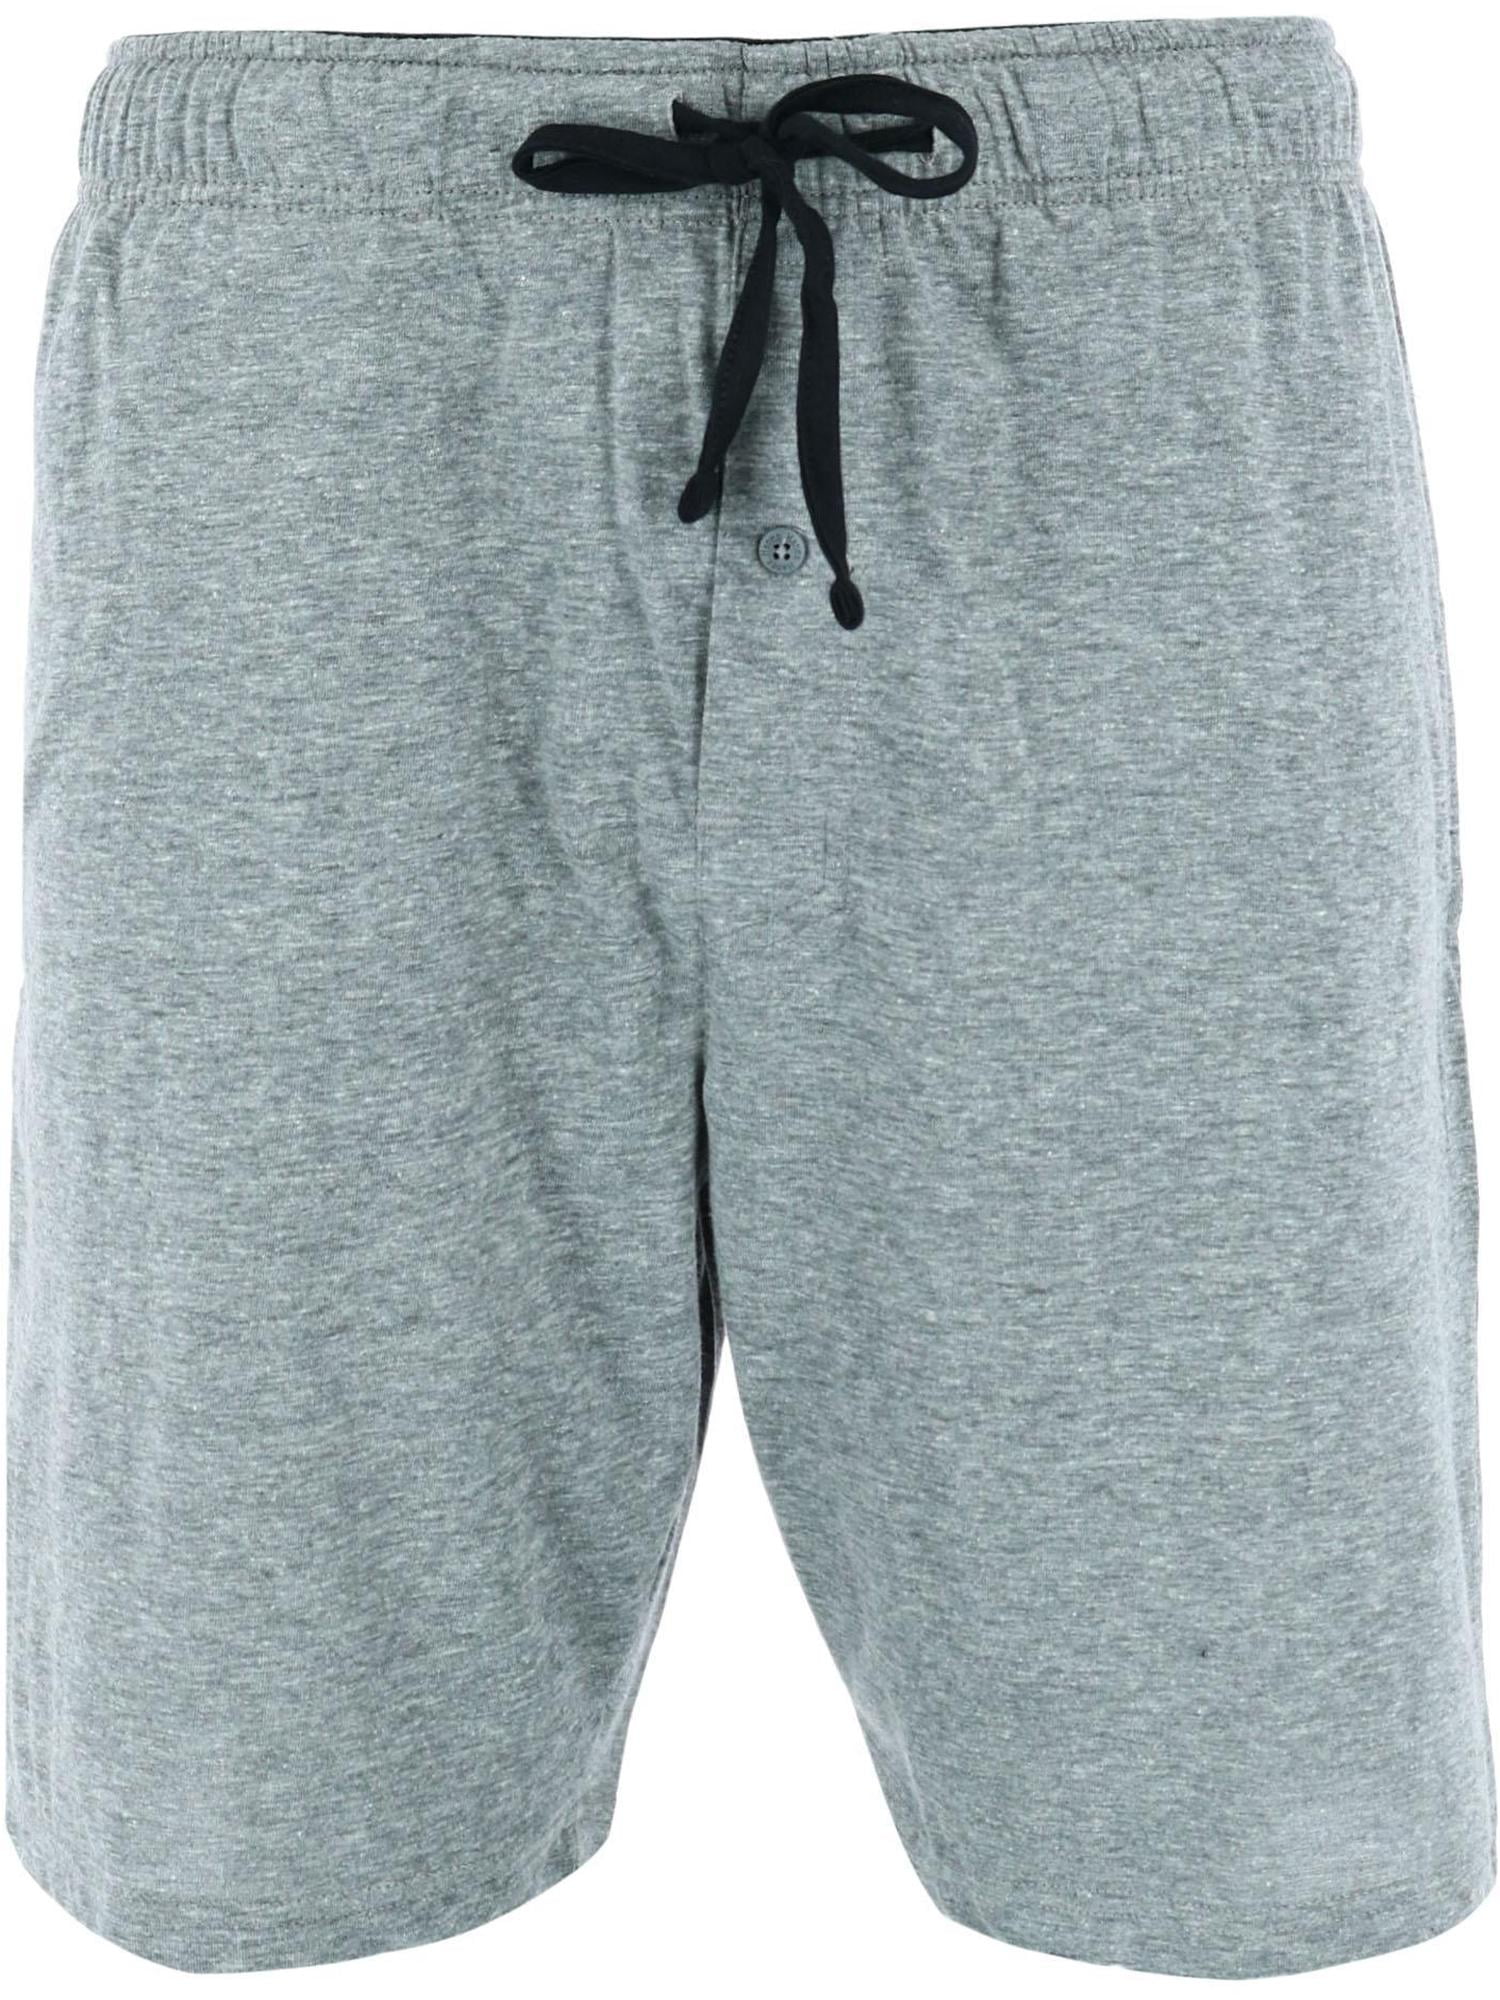 Hanes Tag Free Knit Pajama Lounge Short with Side Pockets (Men ...